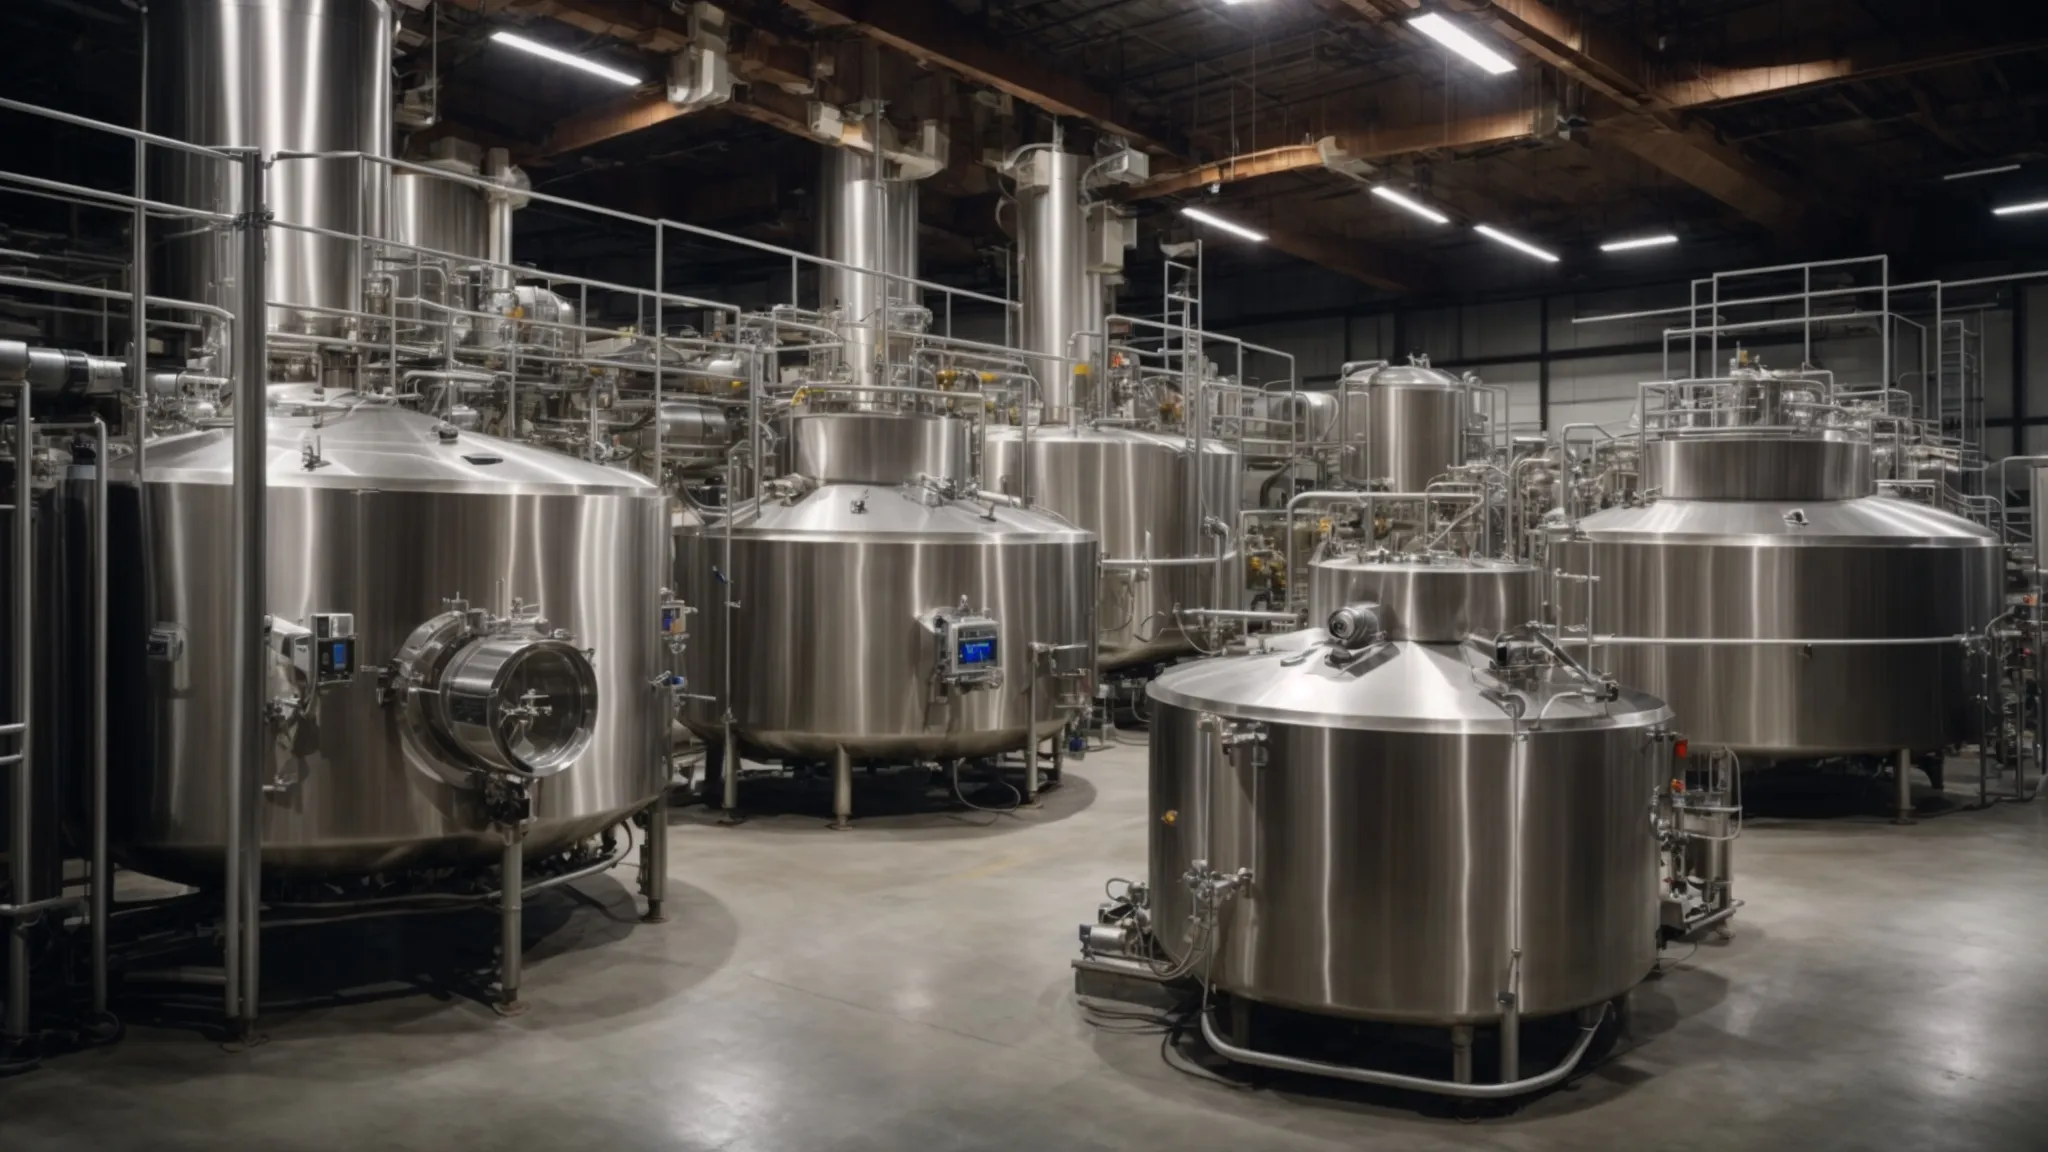 large fermentation tanks intricately connected within a state-of-the-art food production facility symbolize efficient resource recycling.